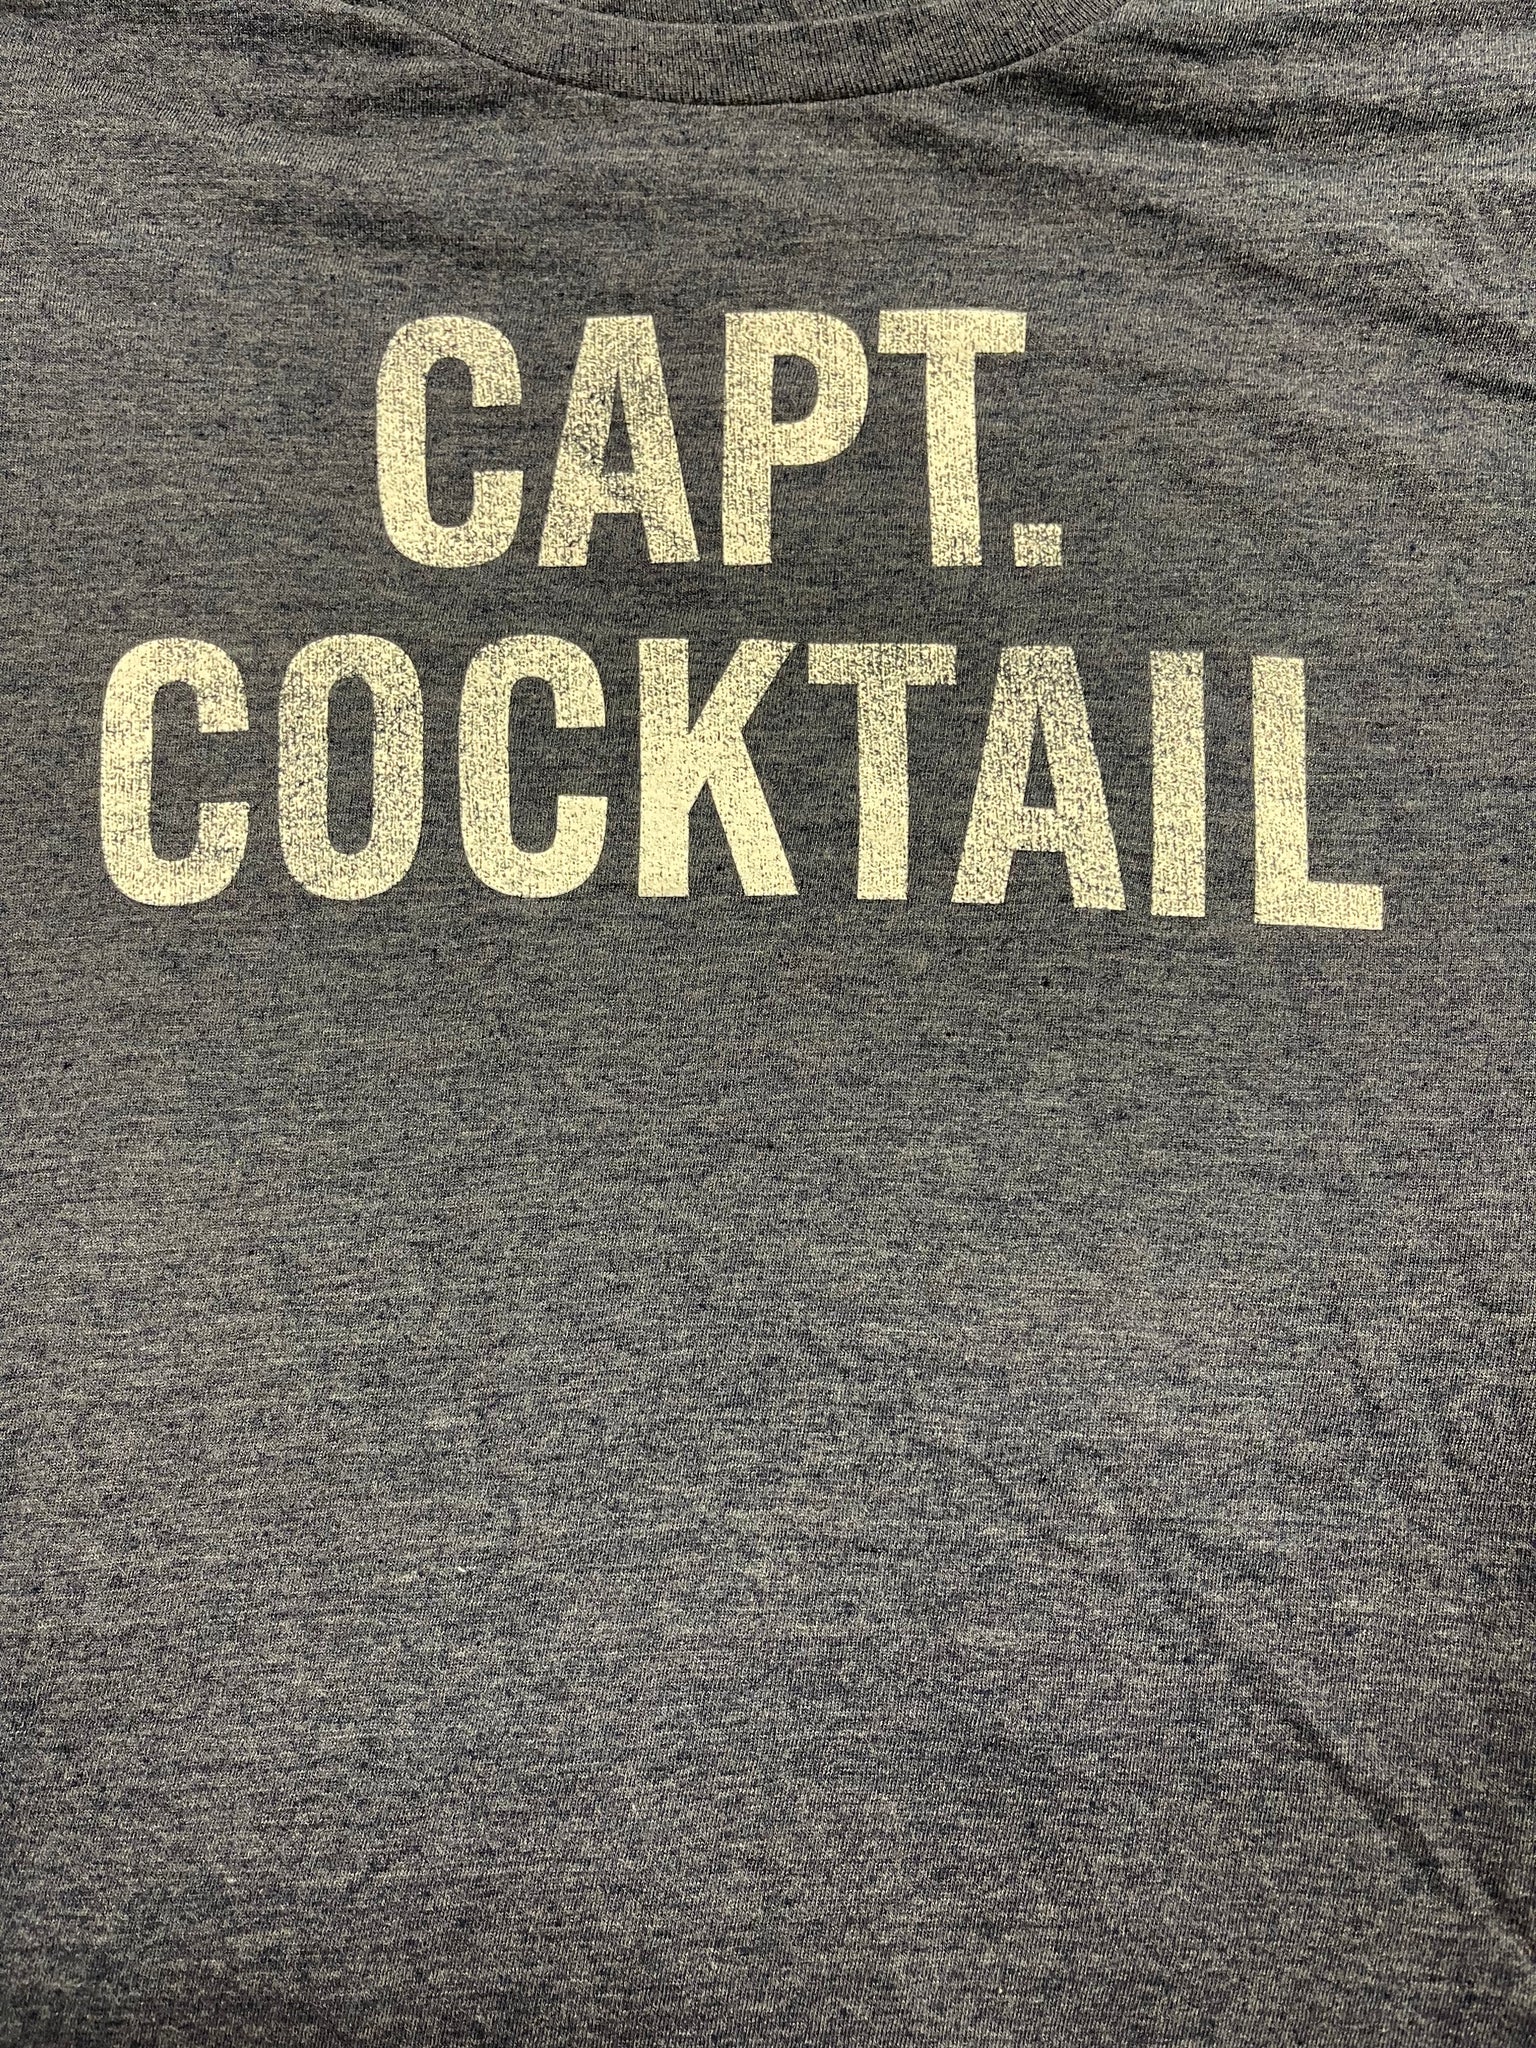 COCKTAIL TEE - CAPT COCKTAIL